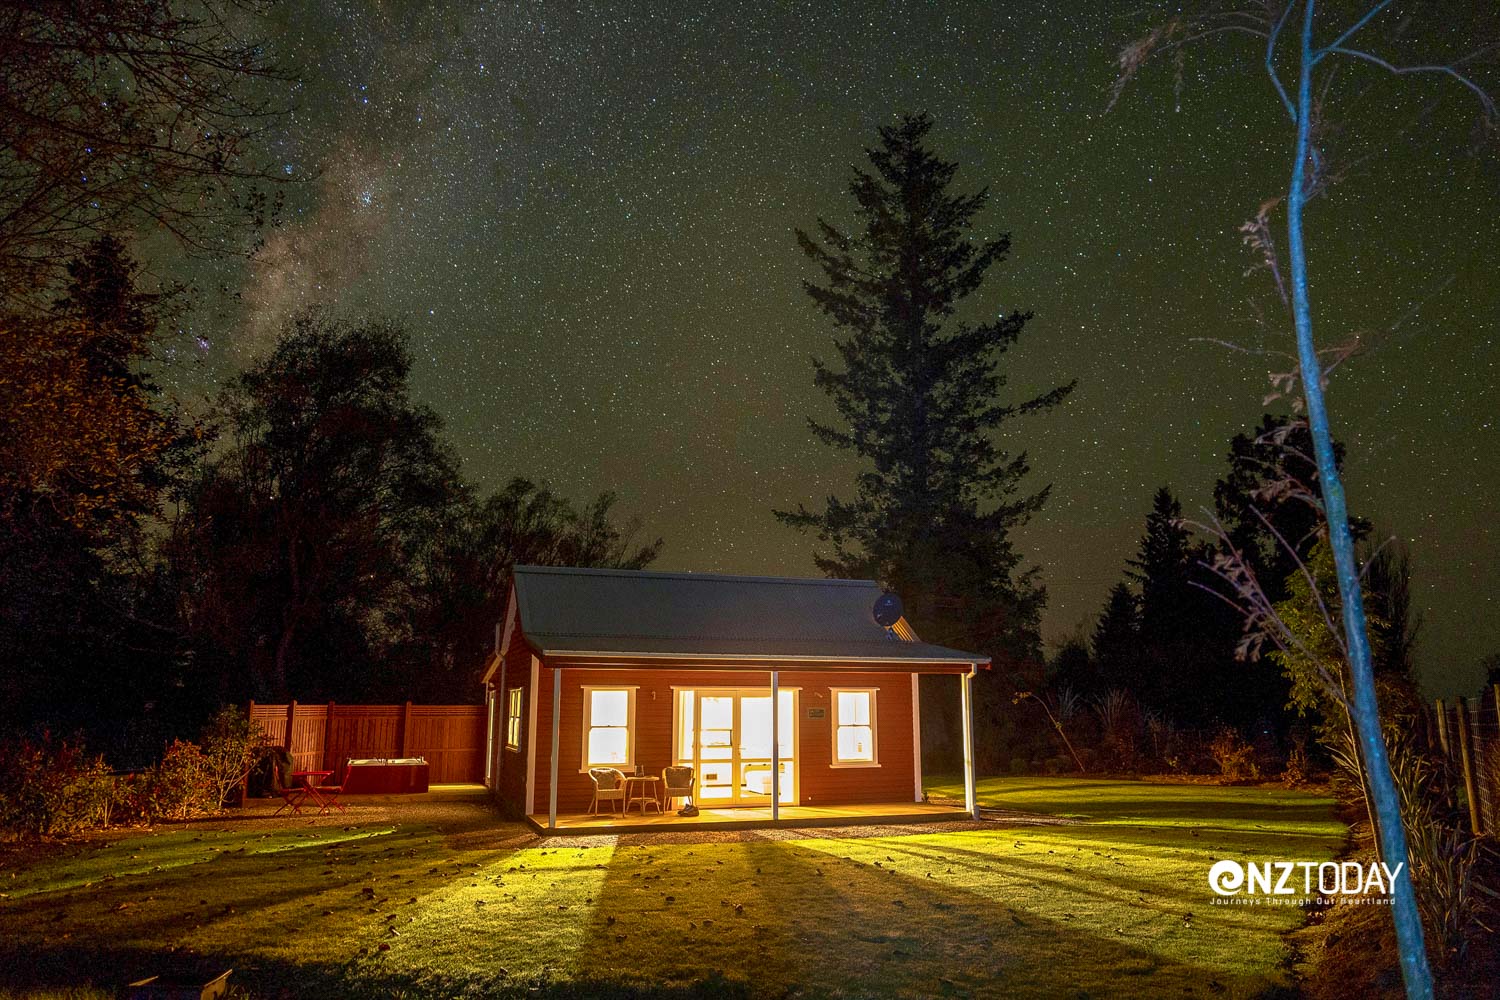 Brilliant! Red Cottage at Staveley under a starry sky